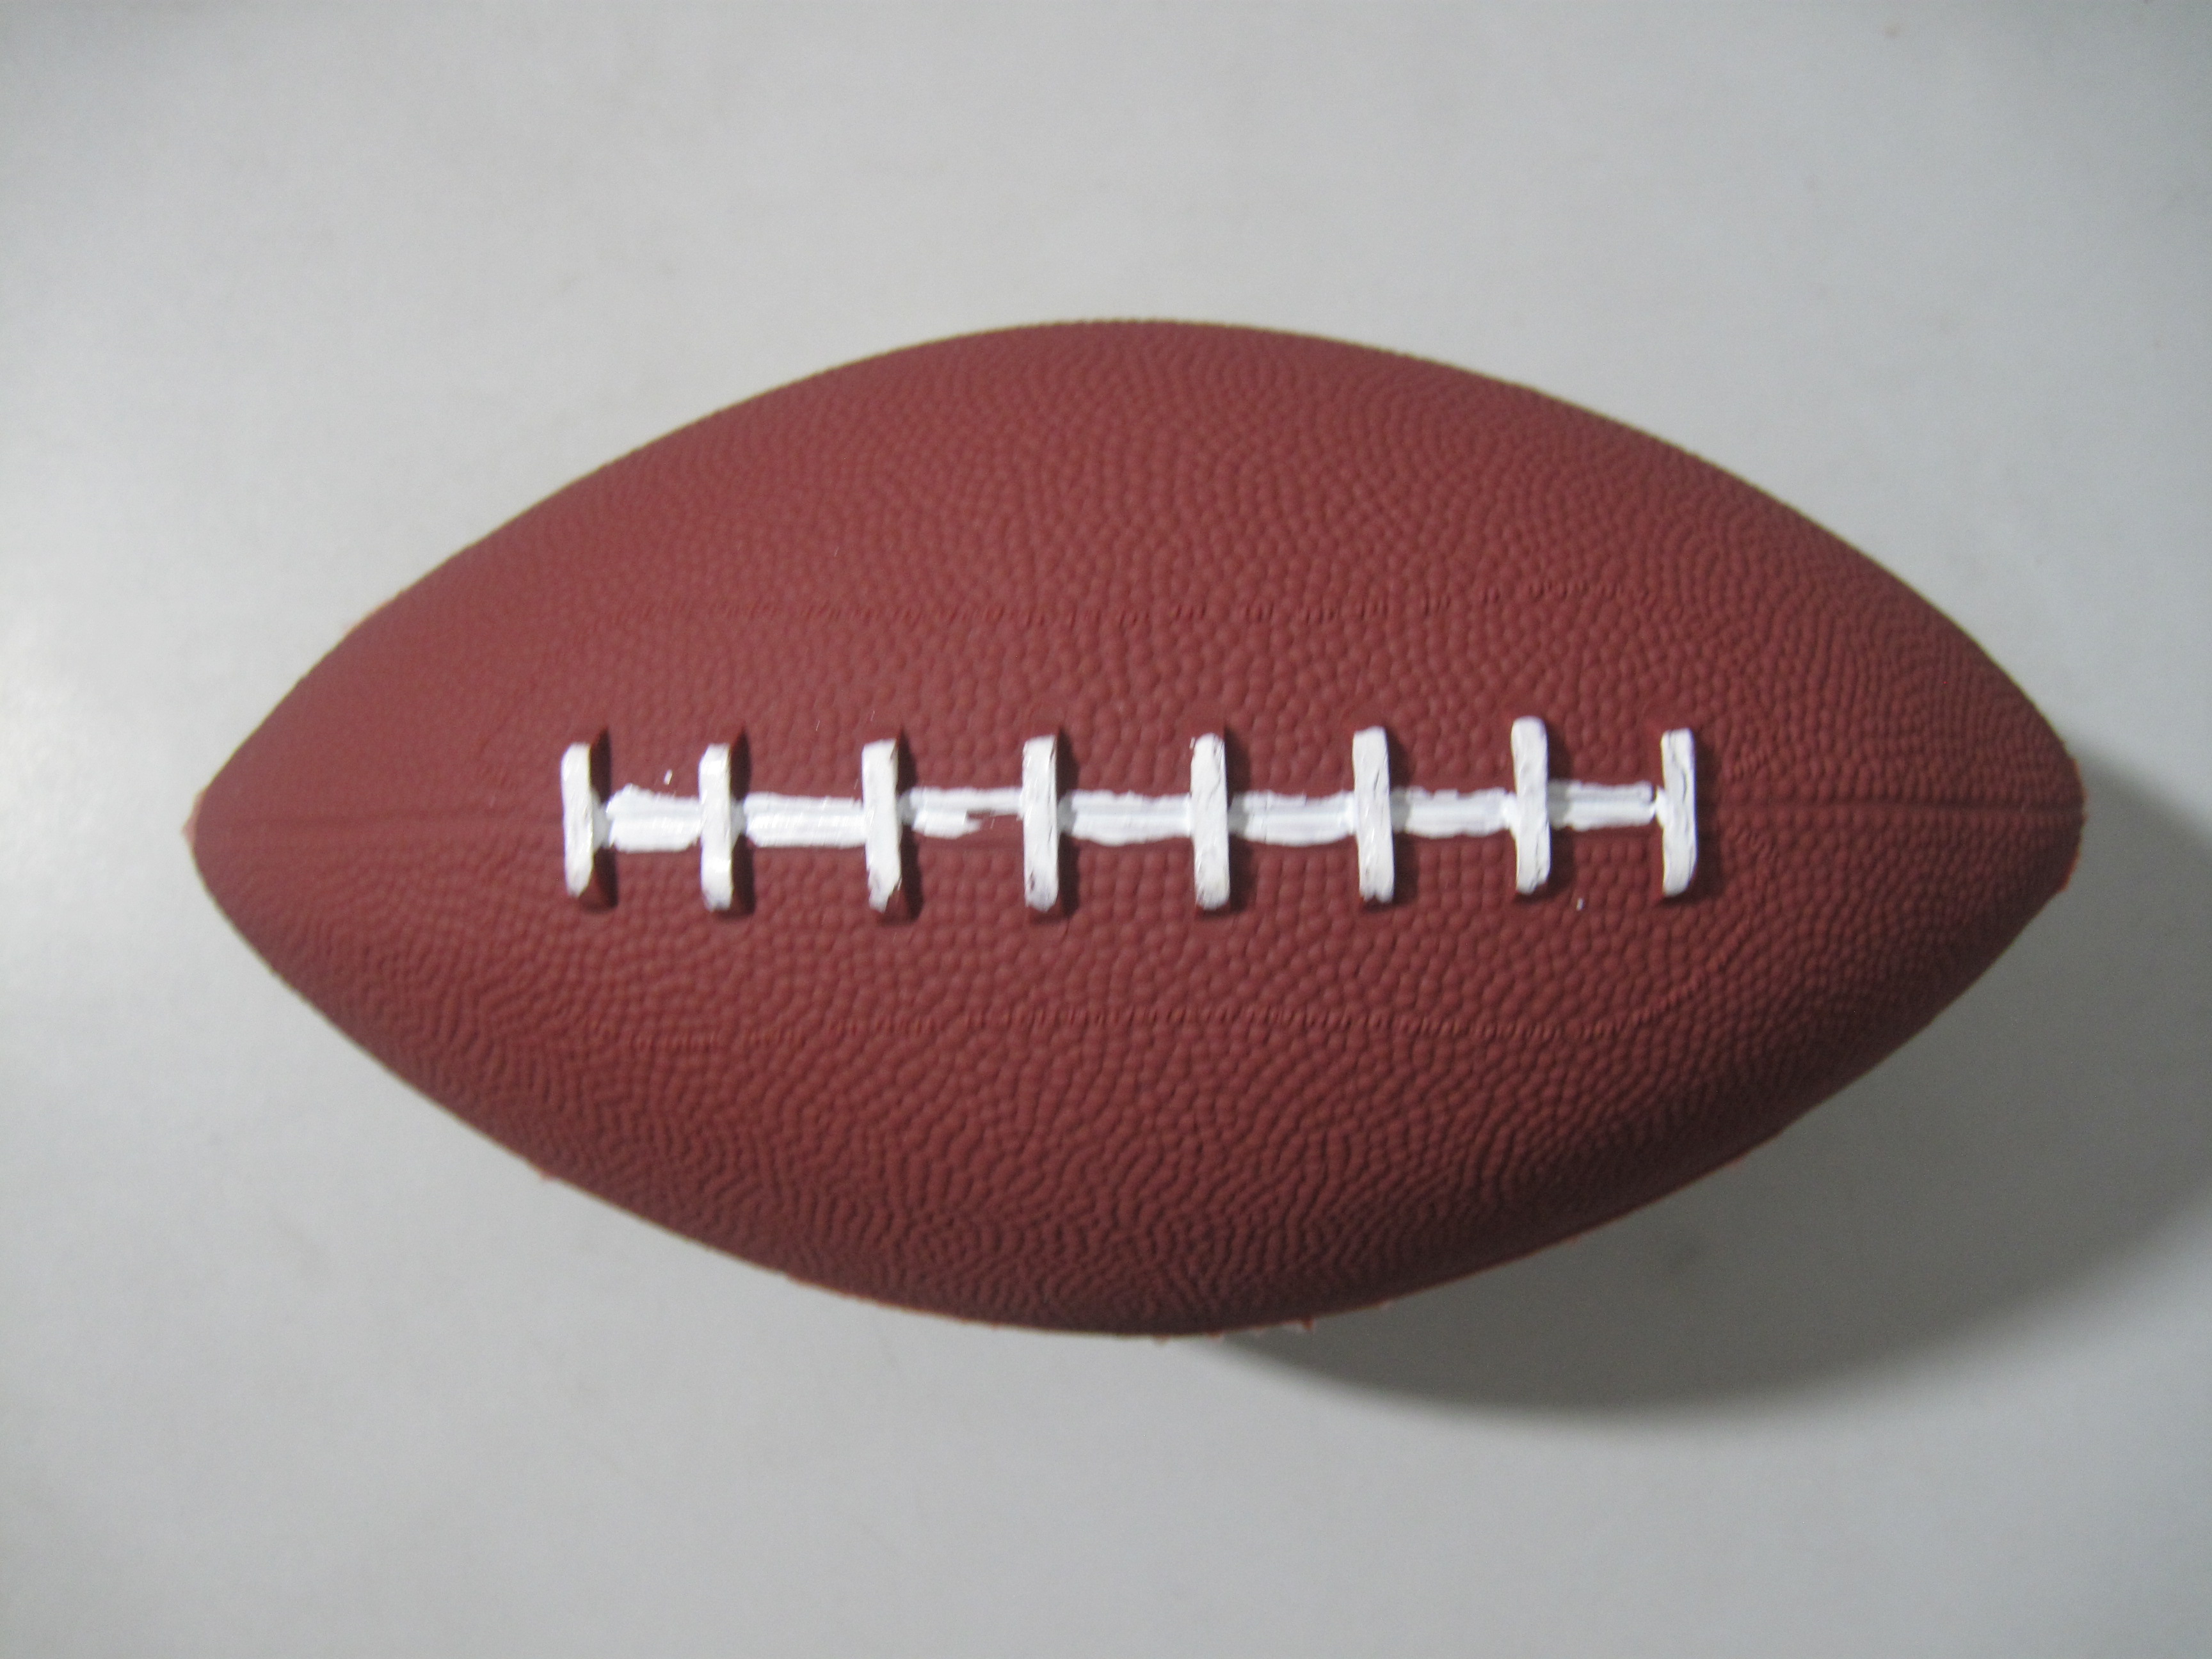 American Football / Rugby Ball–Outdoor at Indoor Sport Ball